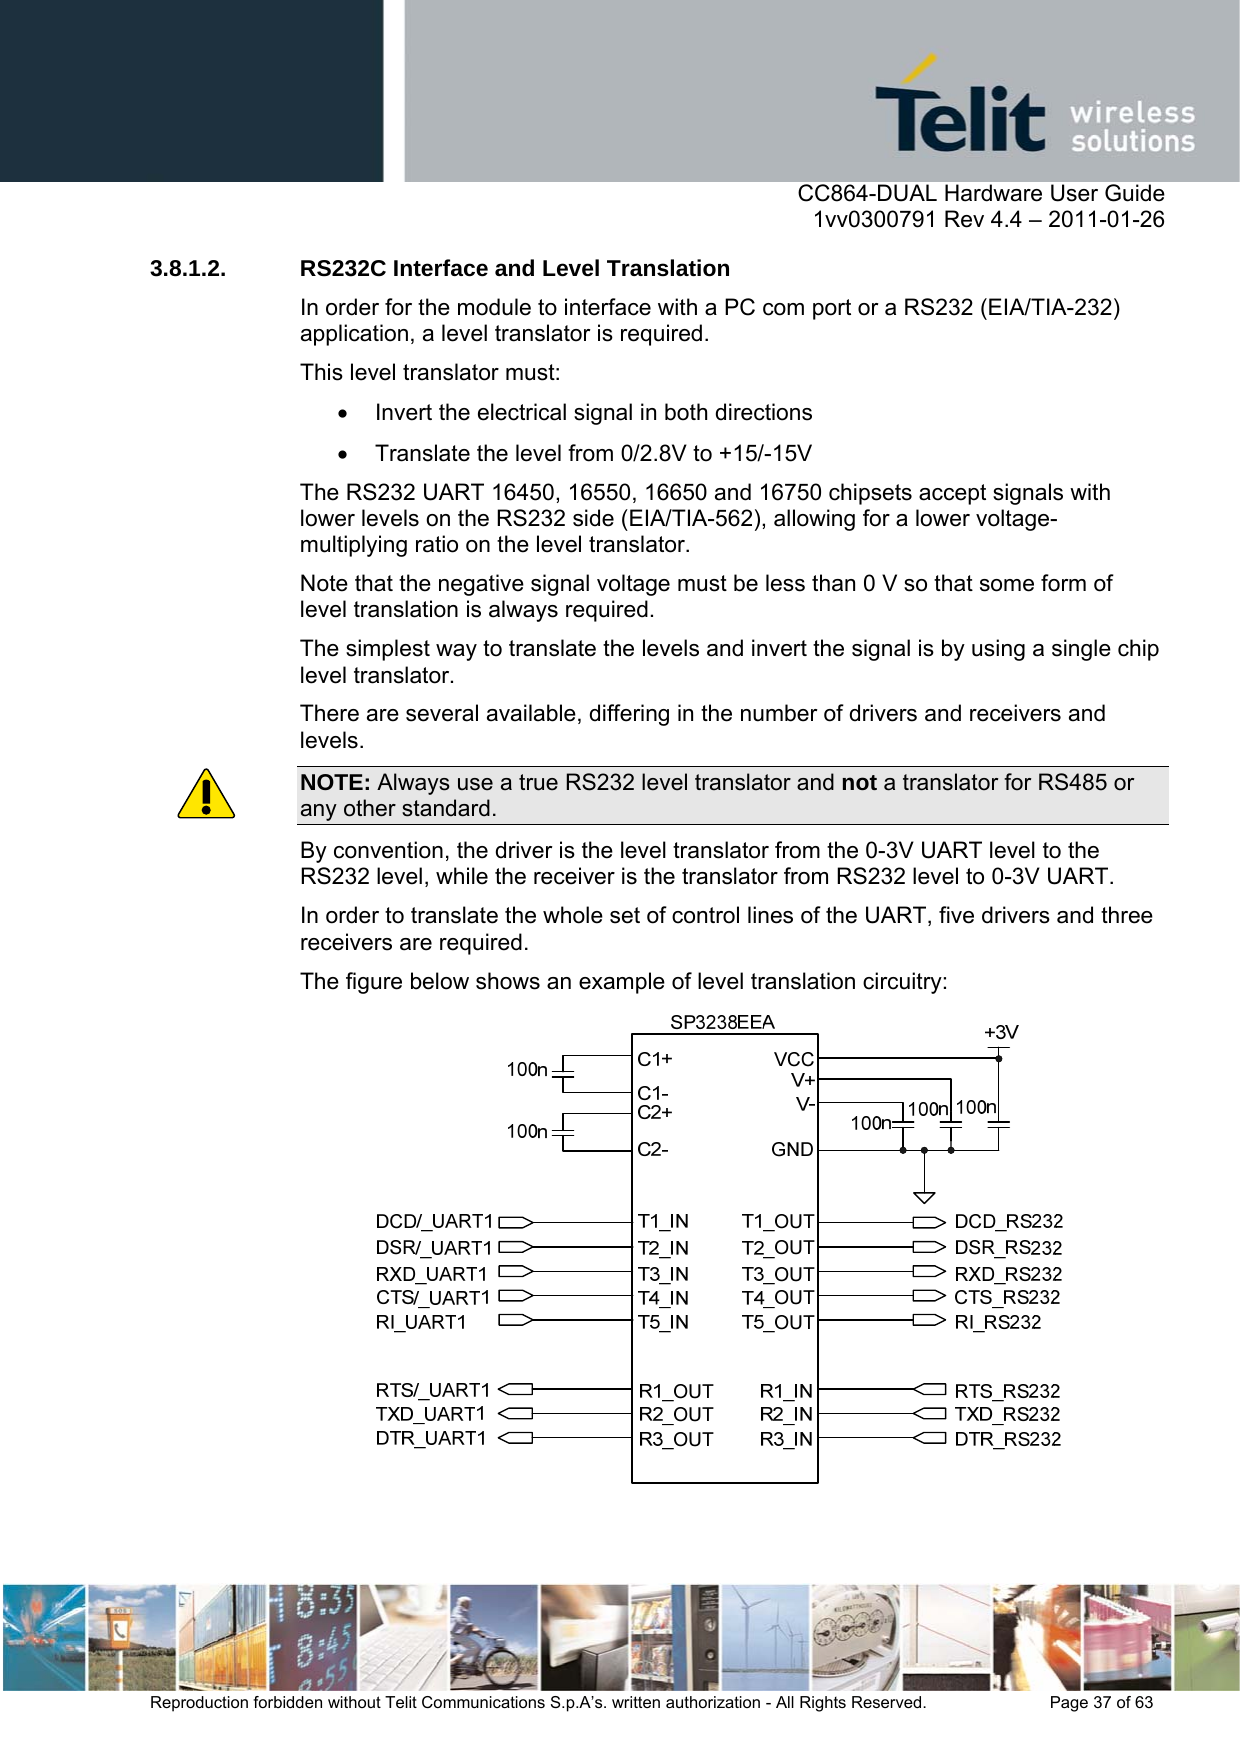      CC864-DUAL Hardware User Guide    1vv0300791 Rev 4.4 – 2011-01-26  Reproduction forbidden without Telit Communications S.p.A’s. written authorization - All Rights Reserved.    Page 37 of 63  3.8.1.2.  RS232C Interface and Level Translation  In order for the module to interface with a PC com port or a RS232 (EIA/TIA-232) application, a level translator is required. This level translator must:   Invert the electrical signal in both directions   Translate the level from 0/2.8V to +15/-15V The RS232 UART 16450, 16550, 16650 and 16750 chipsets accept signals with lower levels on the RS232 side (EIA/TIA-562), allowing for a lower voltage-multiplying ratio on the level translator.  Note that the negative signal voltage must be less than 0 V so that some form of level translation is always required. The simplest way to translate the levels and invert the signal is by using a single chip level translator.  There are several available, differing in the number of drivers and receivers and levels. NOTE: Always use a true RS232 level translator and not a translator for RS485 or any other standard. By convention, the driver is the level translator from the 0-3V UART level to the RS232 level, while the receiver is the translator from RS232 level to 0-3V UART.  In order to translate the whole set of control lines of the UART, five drivers and three receivers are required. The figure below shows an example of level translation circuitry:    